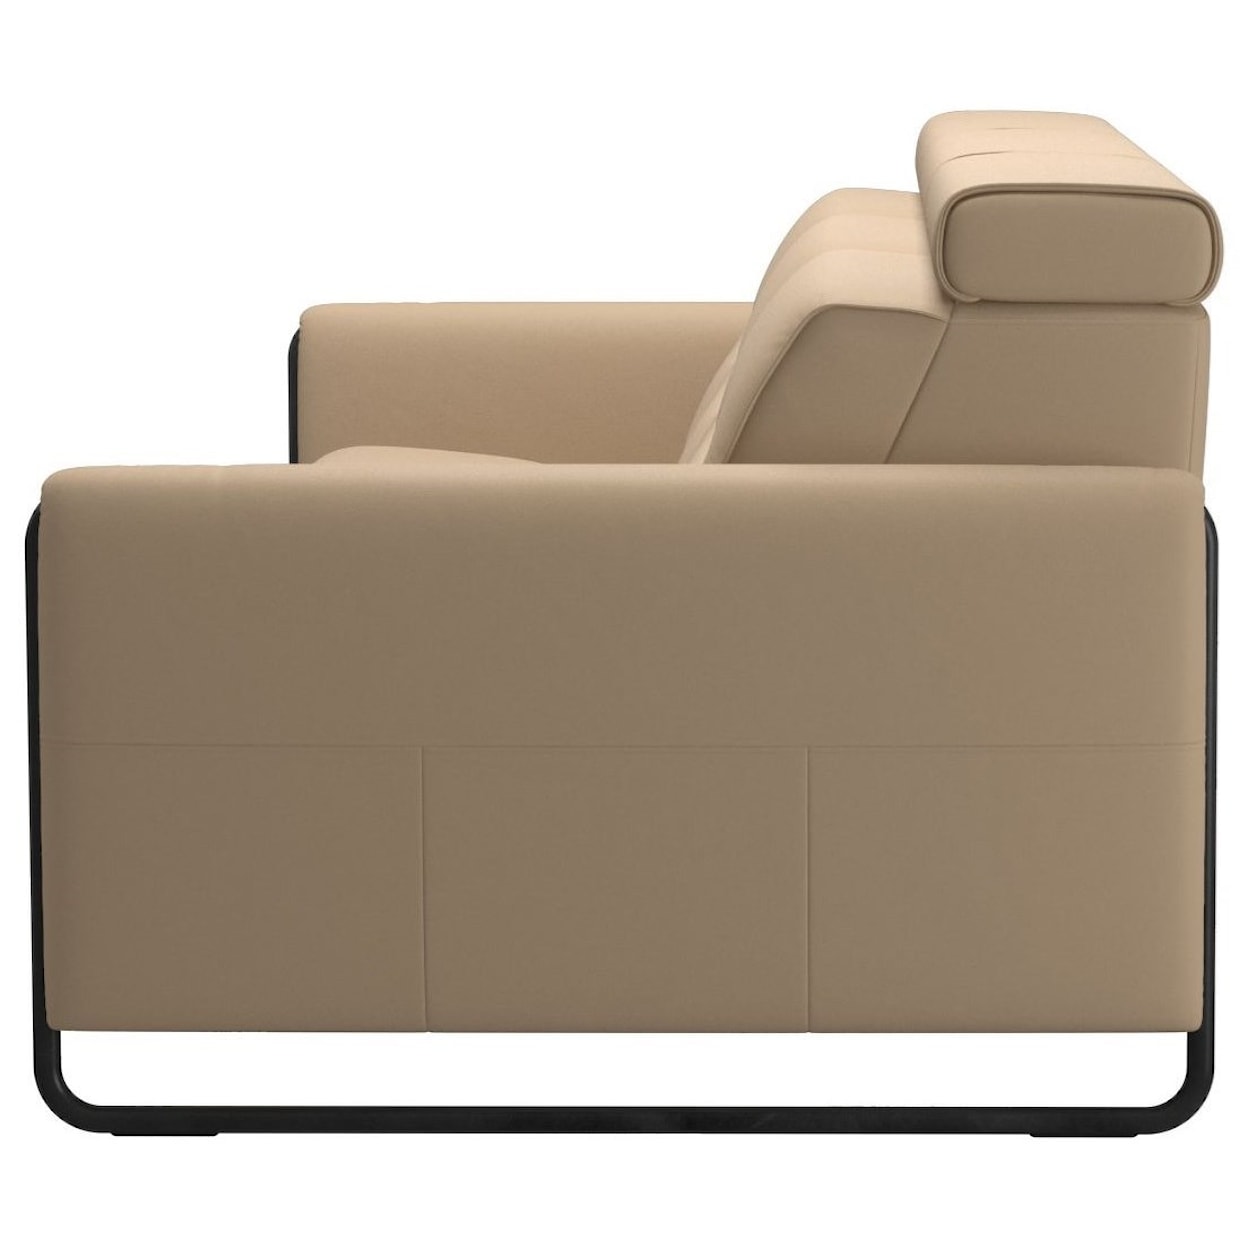 Stressless by Ekornes Emily Power 3-Seat Sofa with Steel Arms